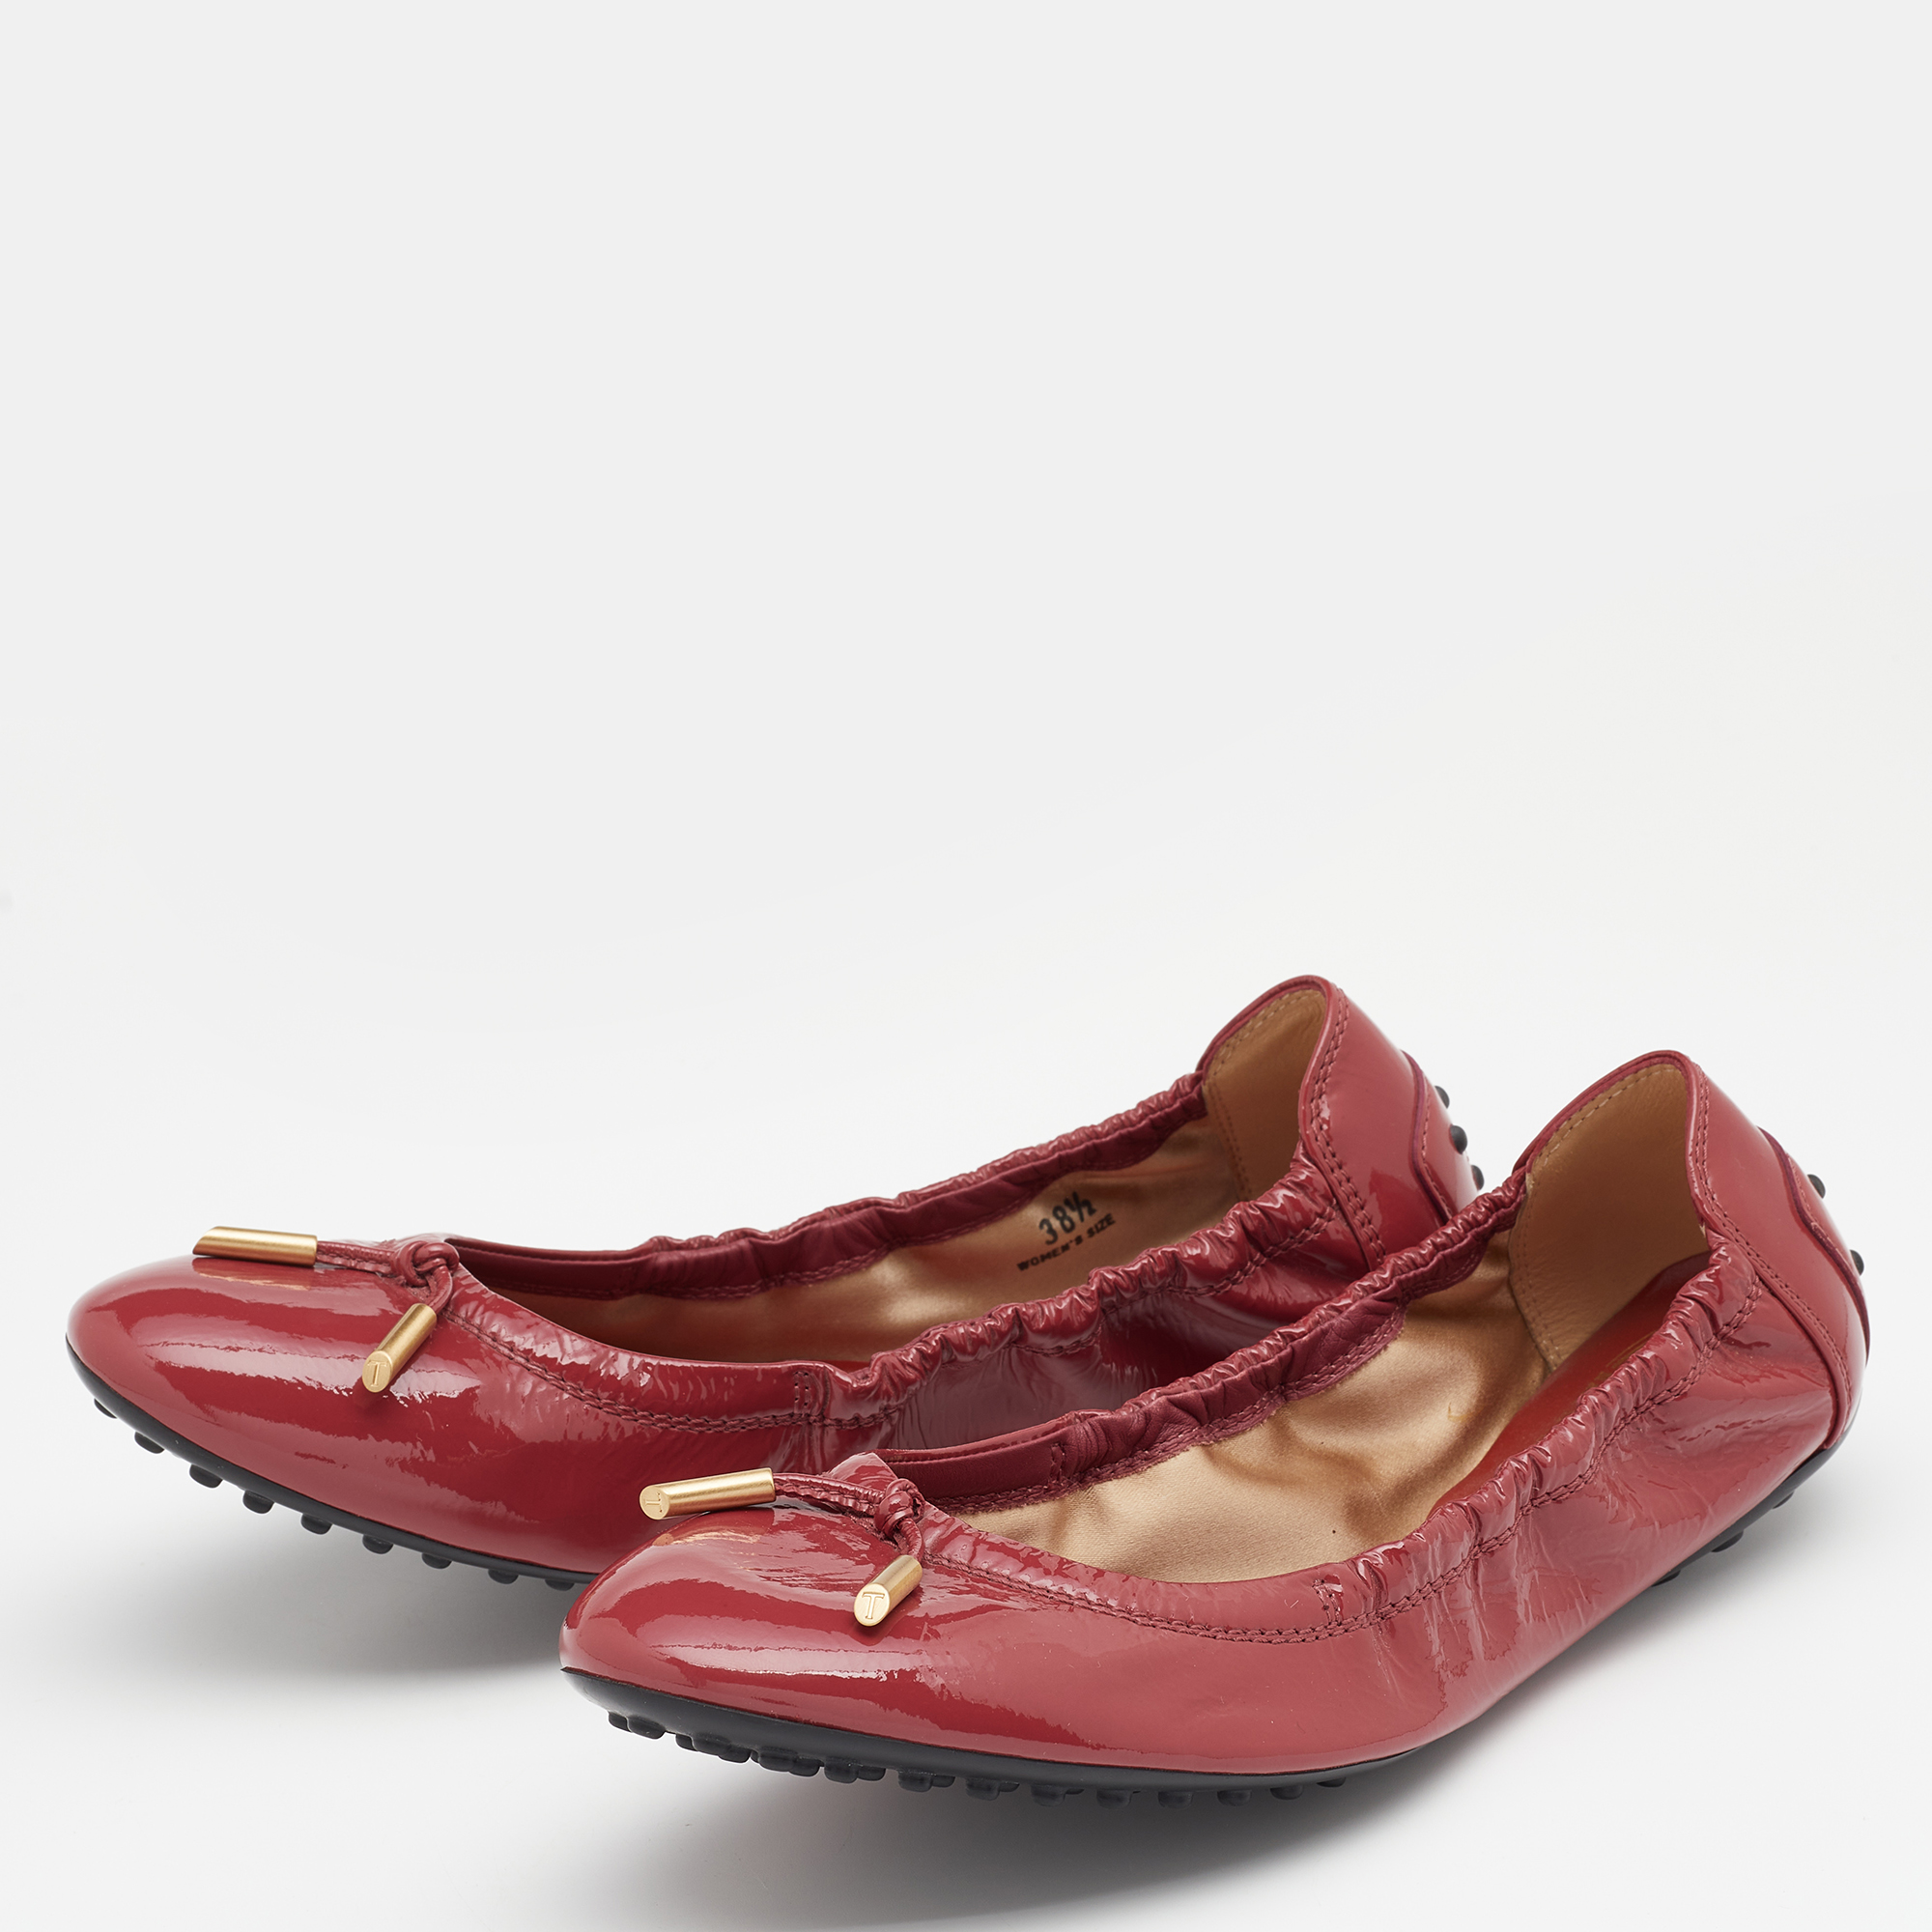 

Tod's Burgundy Patent Leather Scrunch Ballet Flats Size